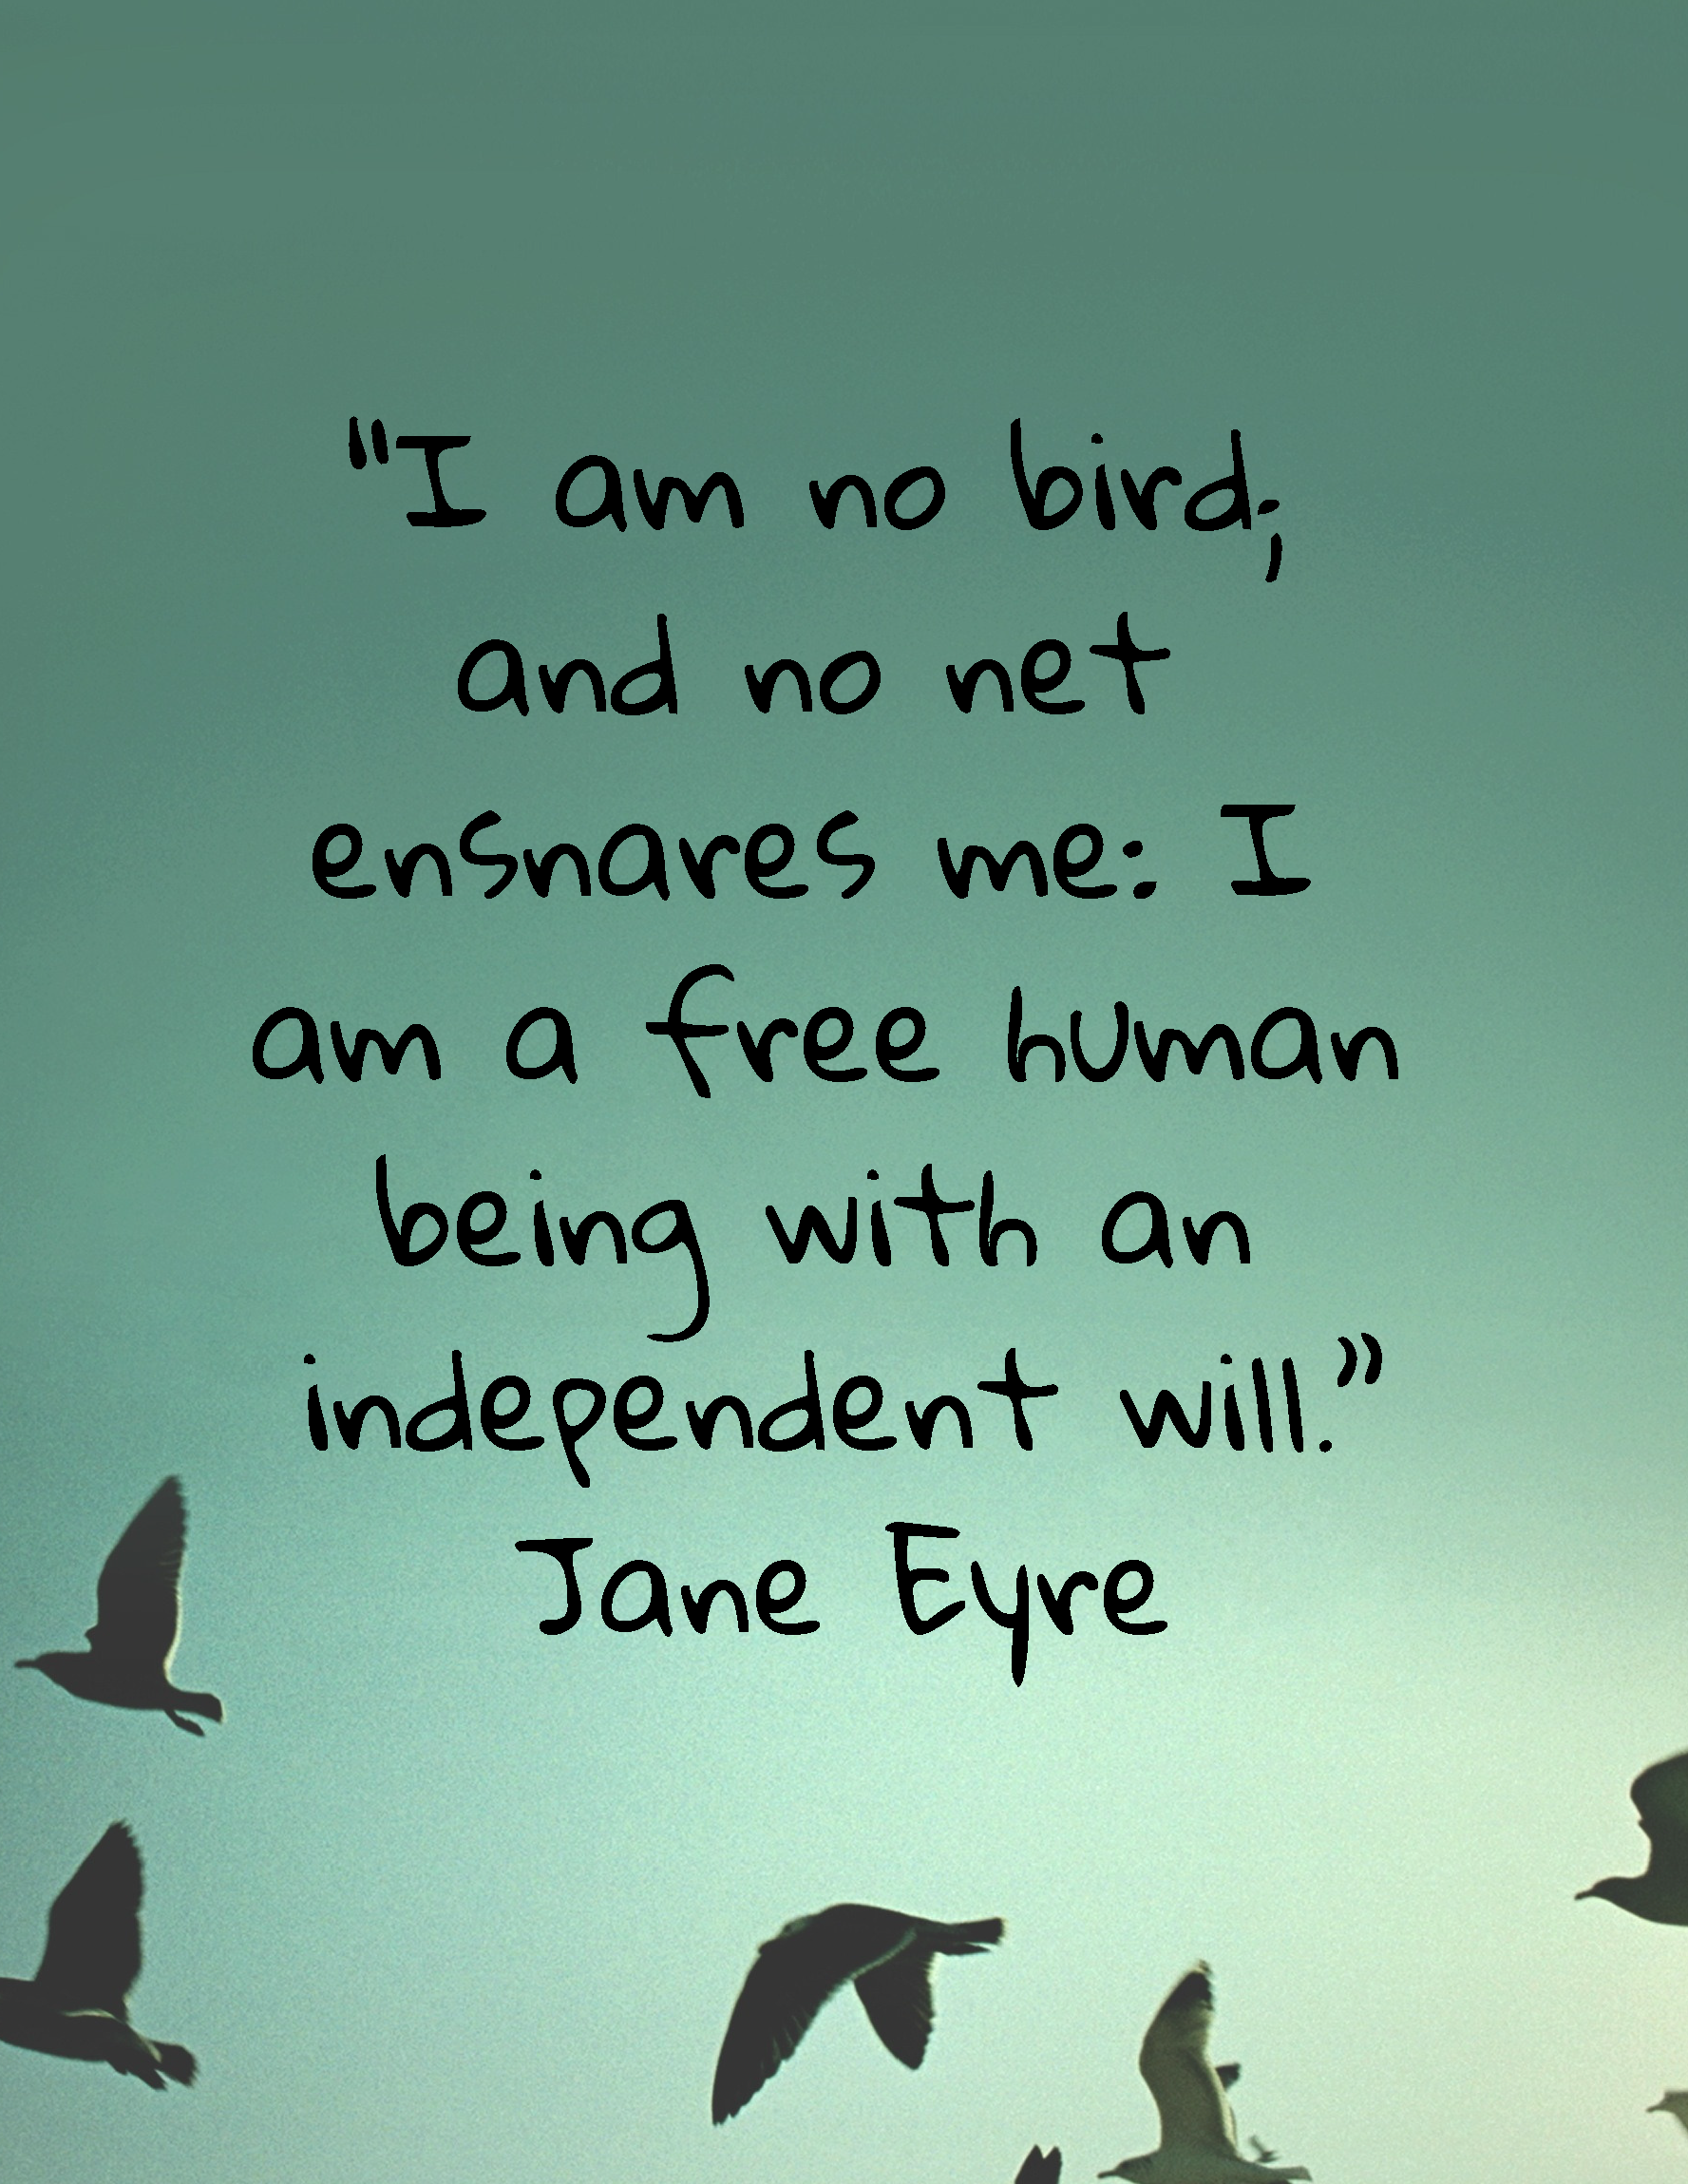 LWS+jane+eyre+bird.png